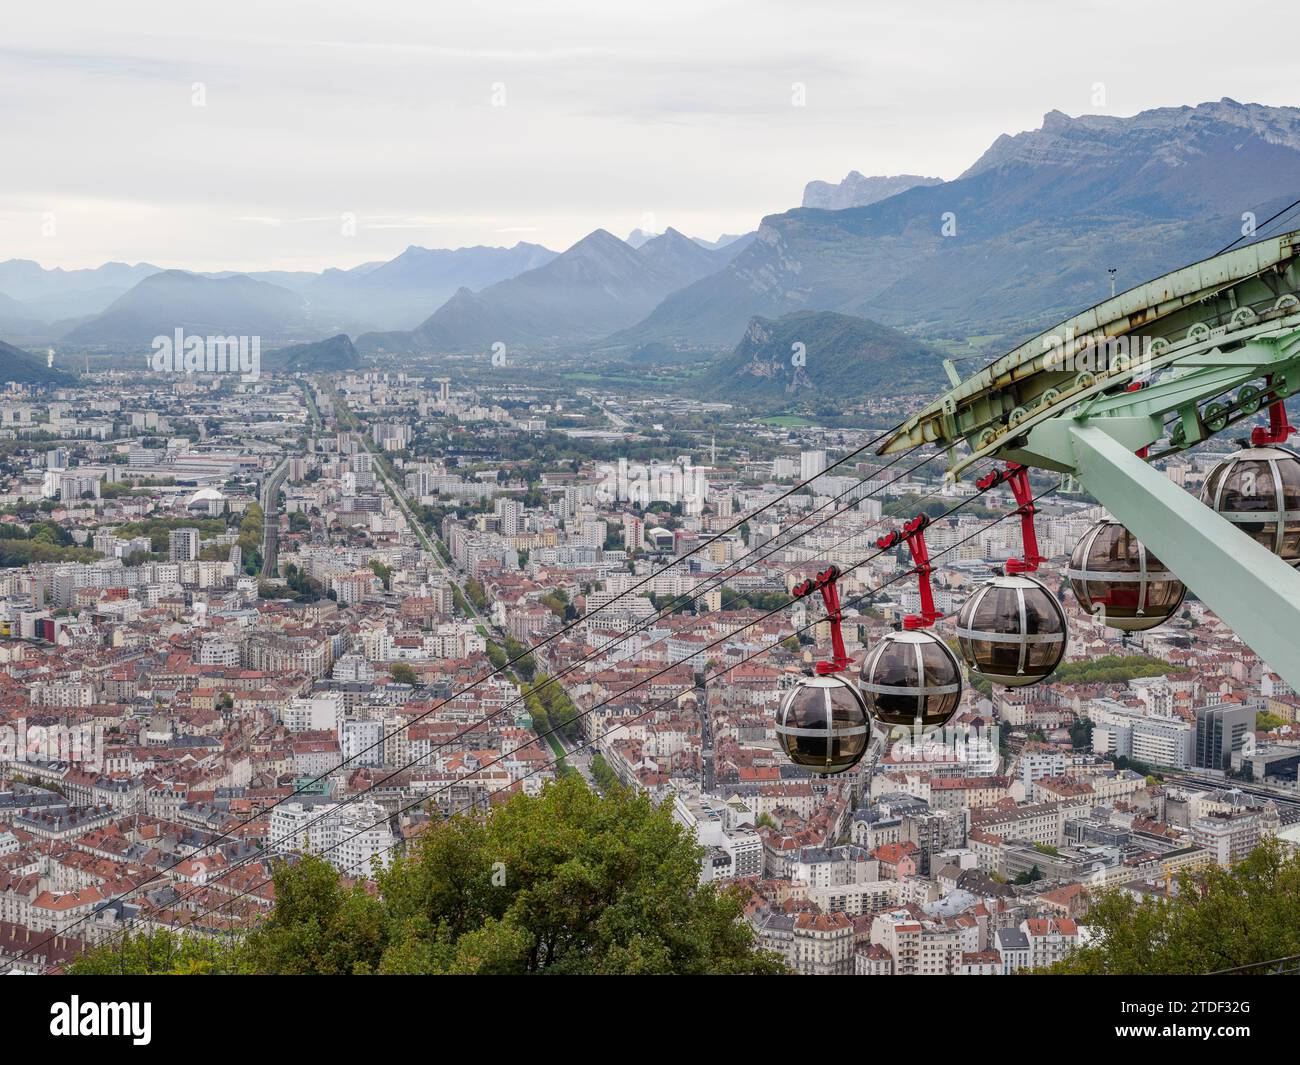 View from the Bastille hill over Grenoble with mountains in the background and cable car in the foreground, Grenoble, Auvergne-Rhone-Alpes, France Stock Photo